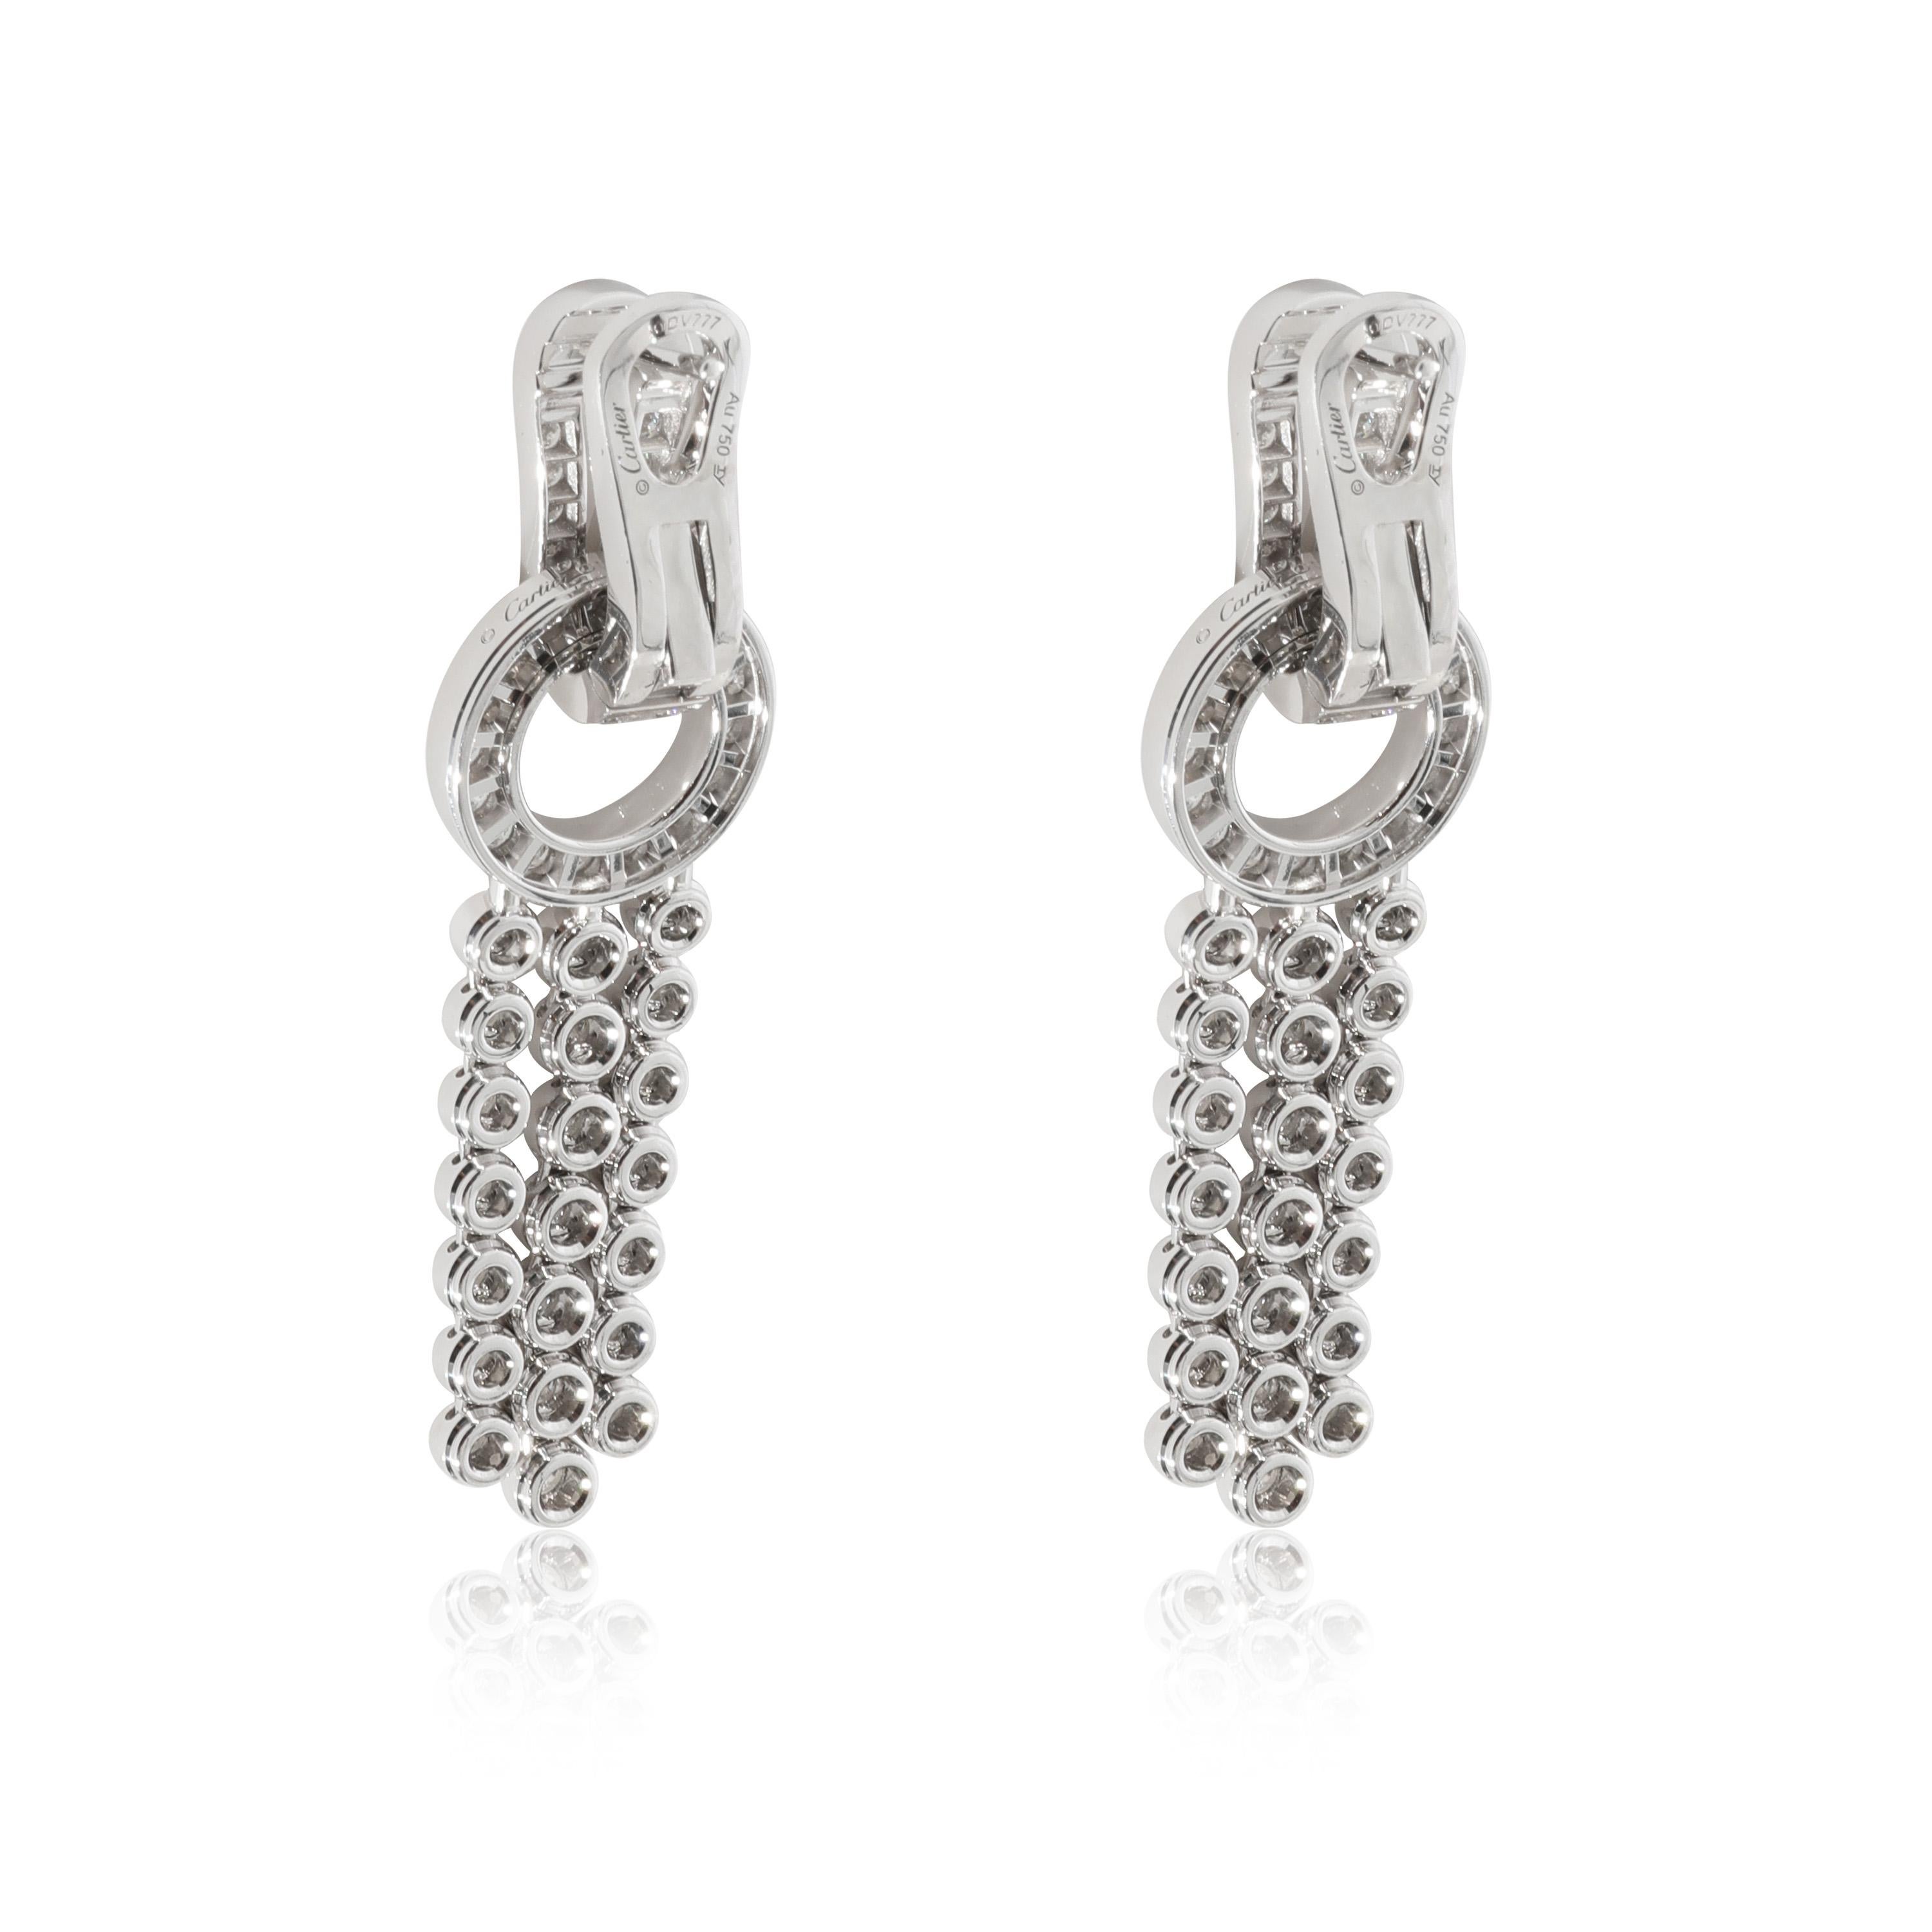 Cartier Agrafe Diamond Earring in 18k White Gold 3.31 CTW
 
 PRIMARY DETAILS
 SKU: 128990
 Listing Title: Cartier Agrafe Diamond Earring in 18k White Gold 3.31 CTW
 Condition Description: Influenced by haute couture design, the Agrafe collection